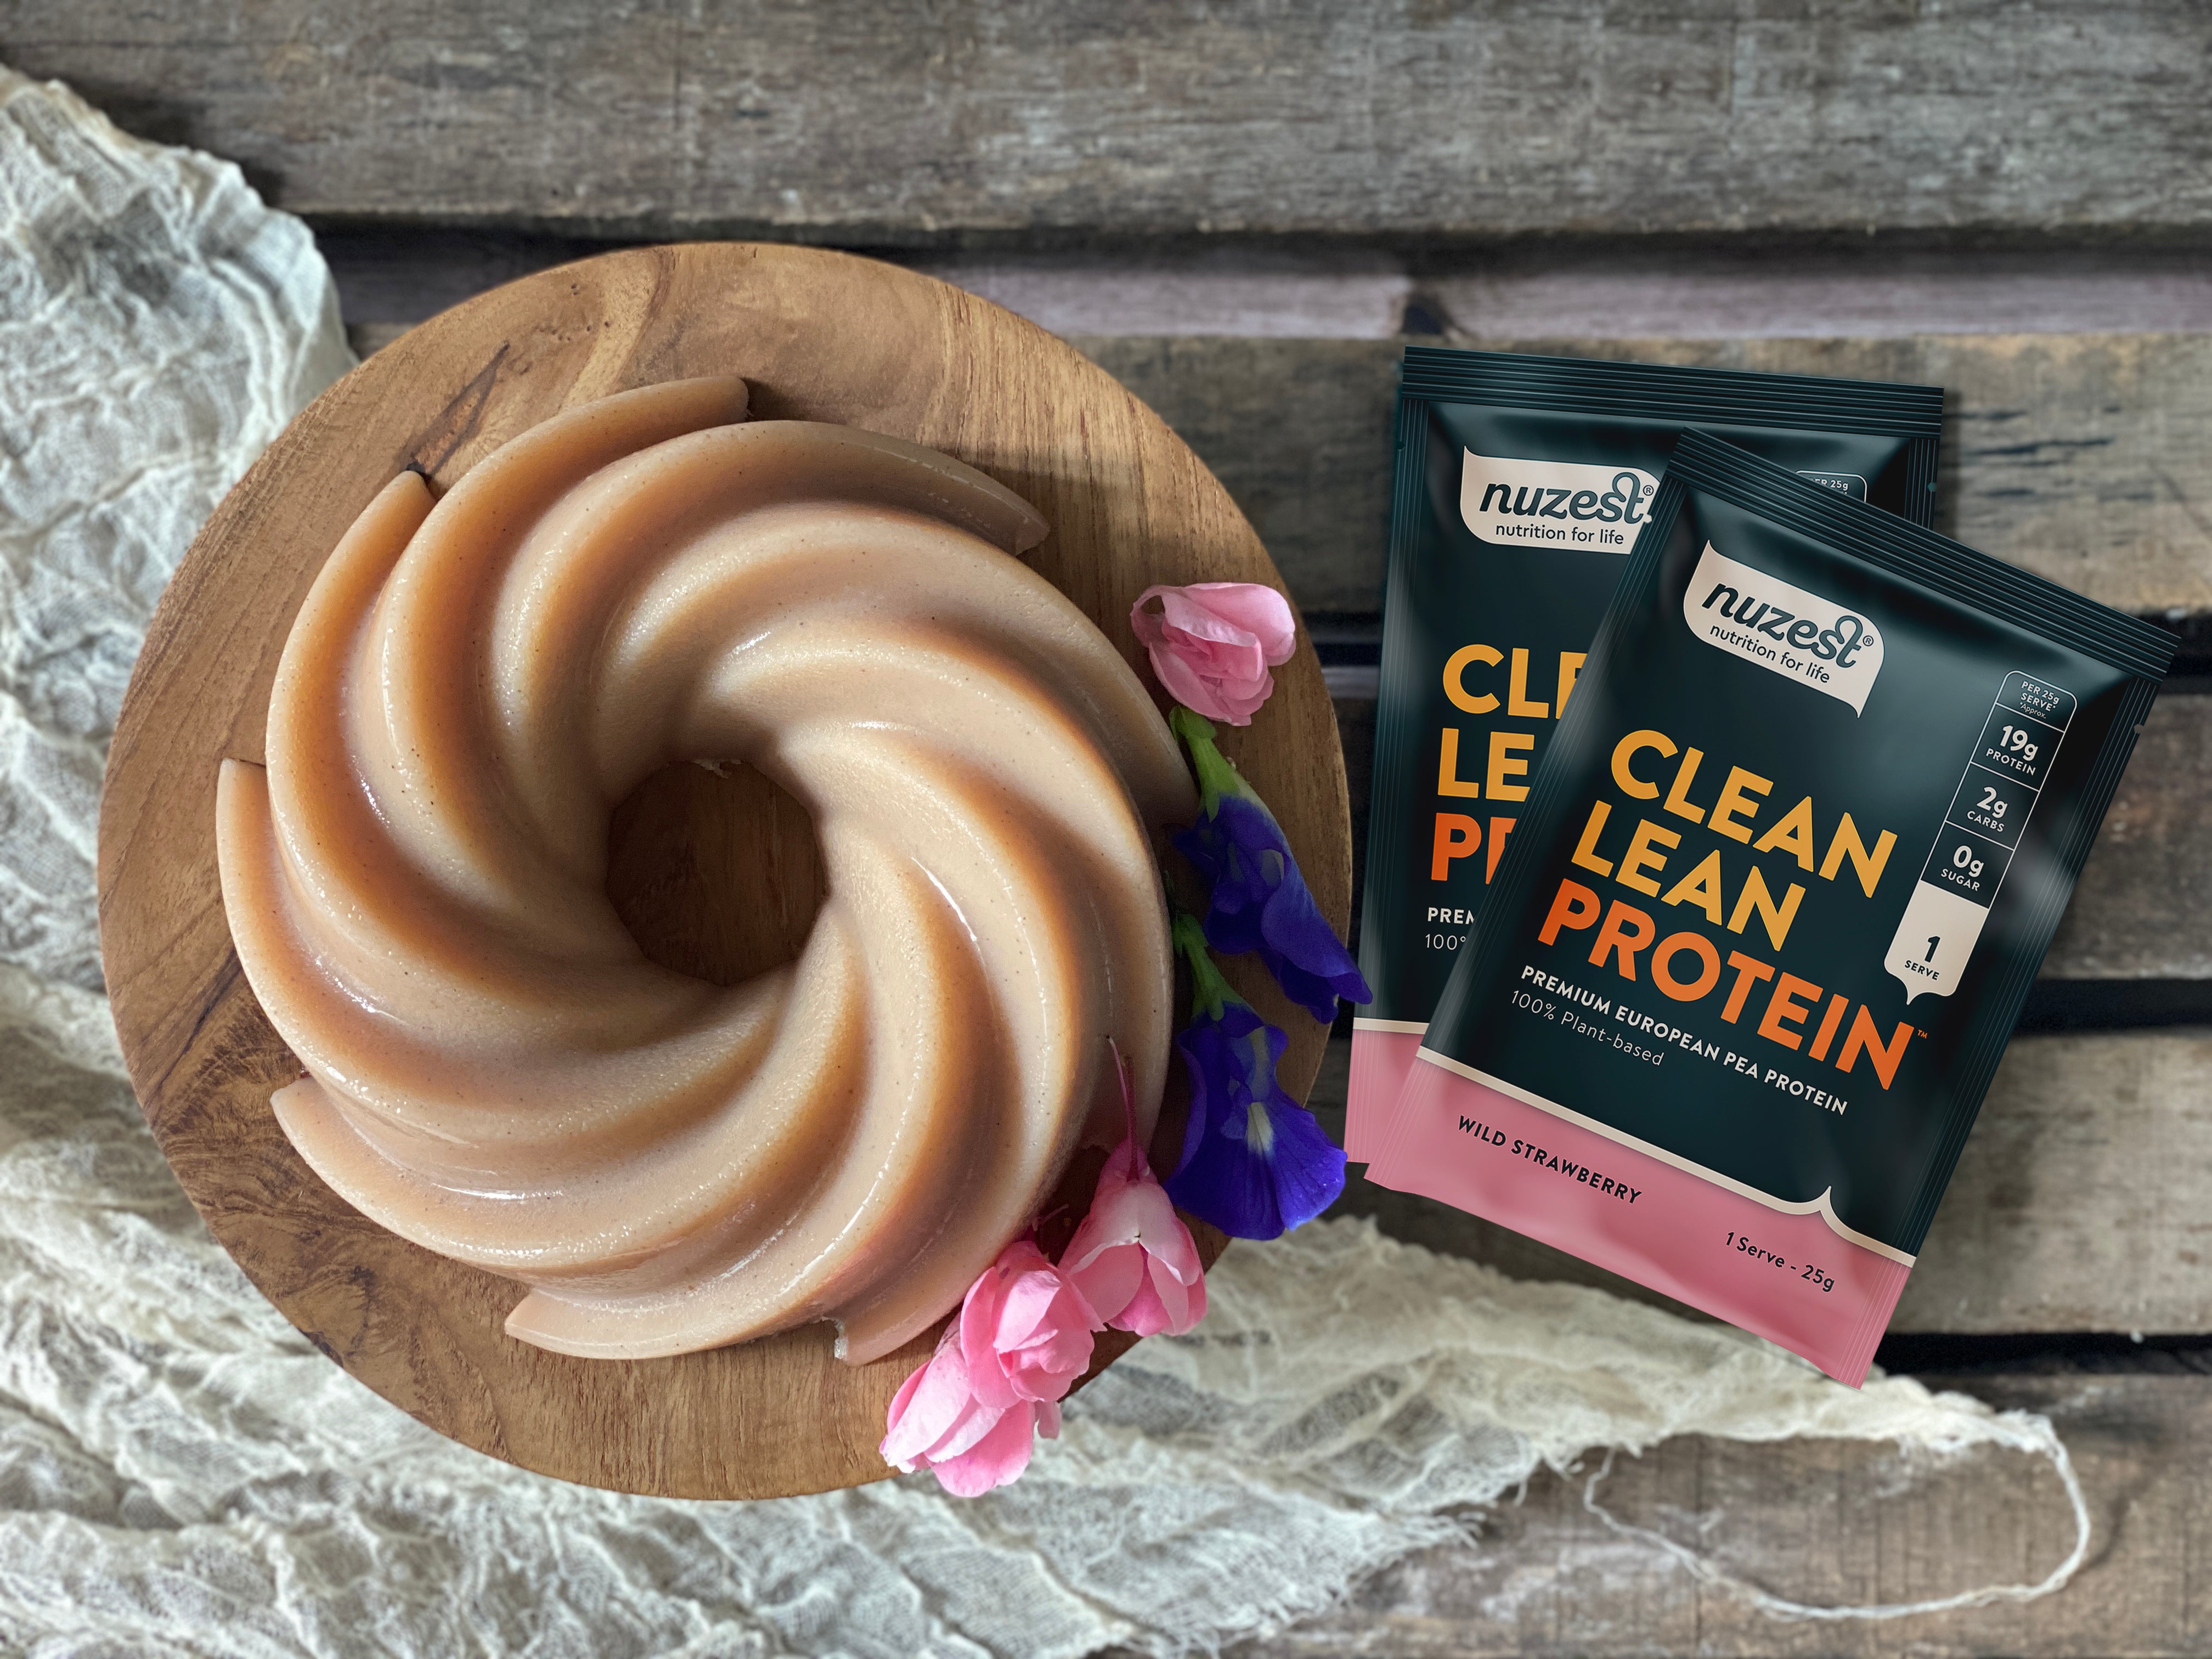 Clean Lean Protein Jelly